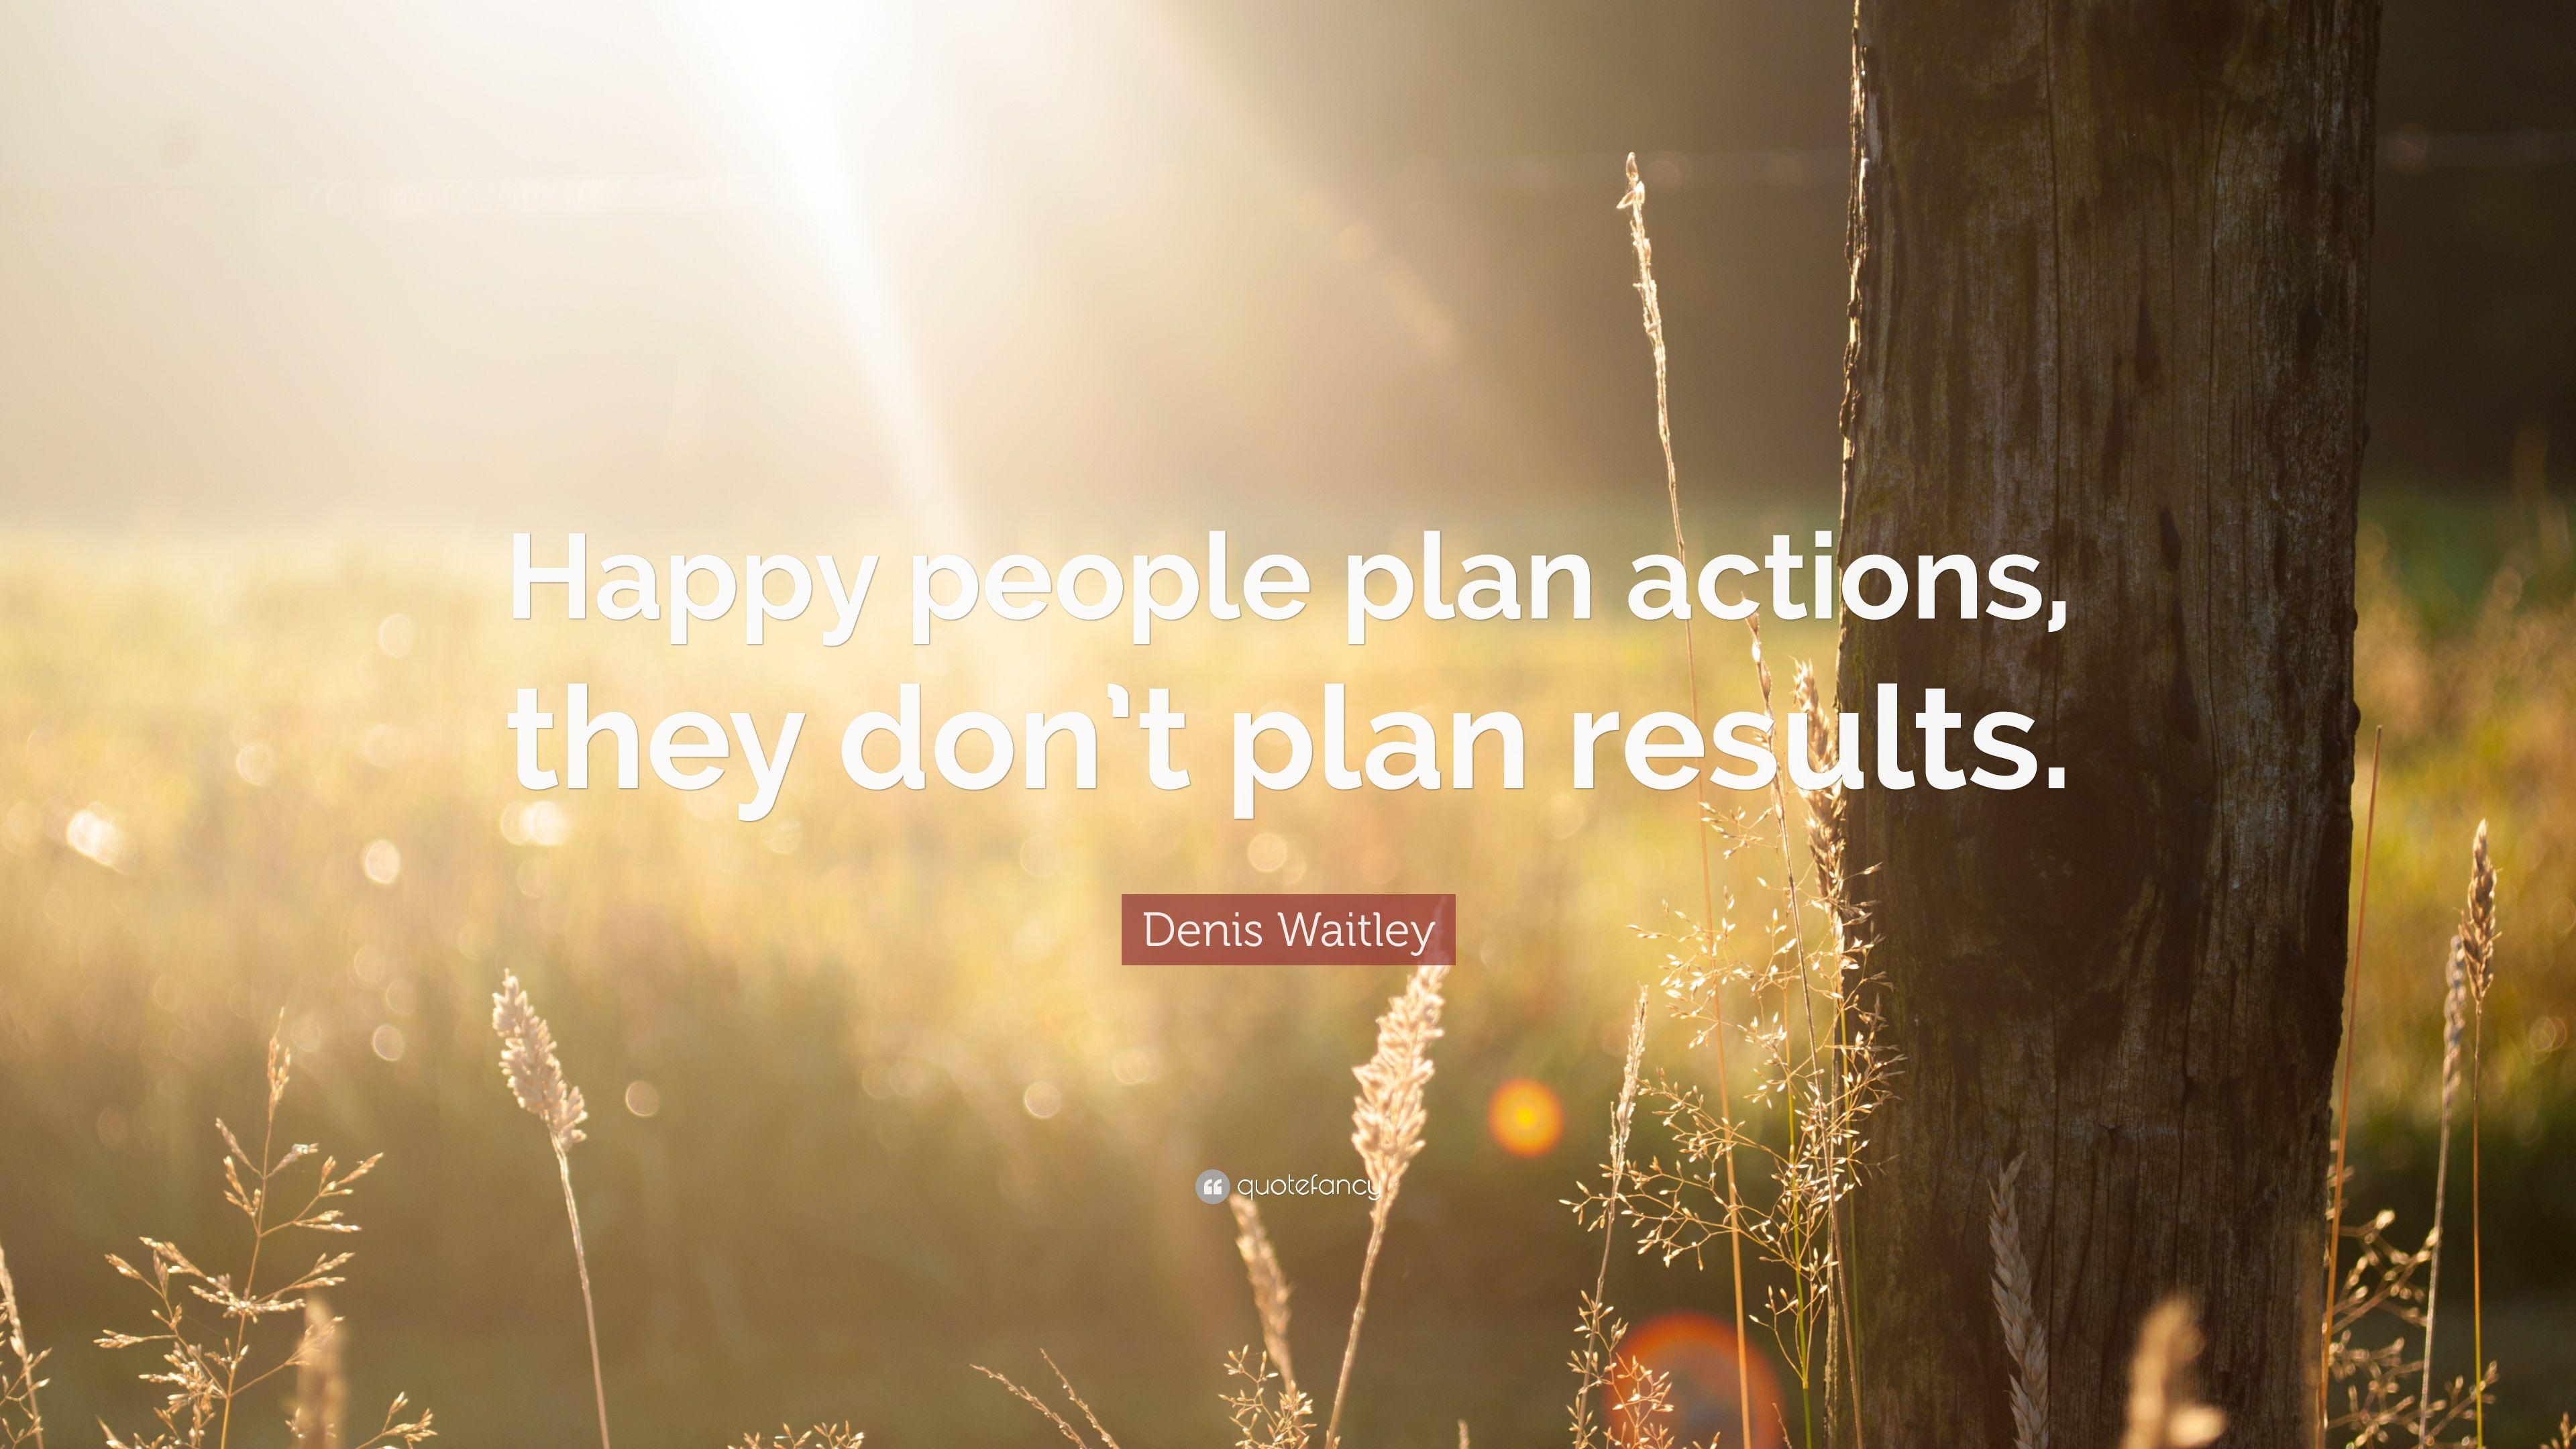 Denis Waitley Quote: “Happy people plan actions, they don't plan